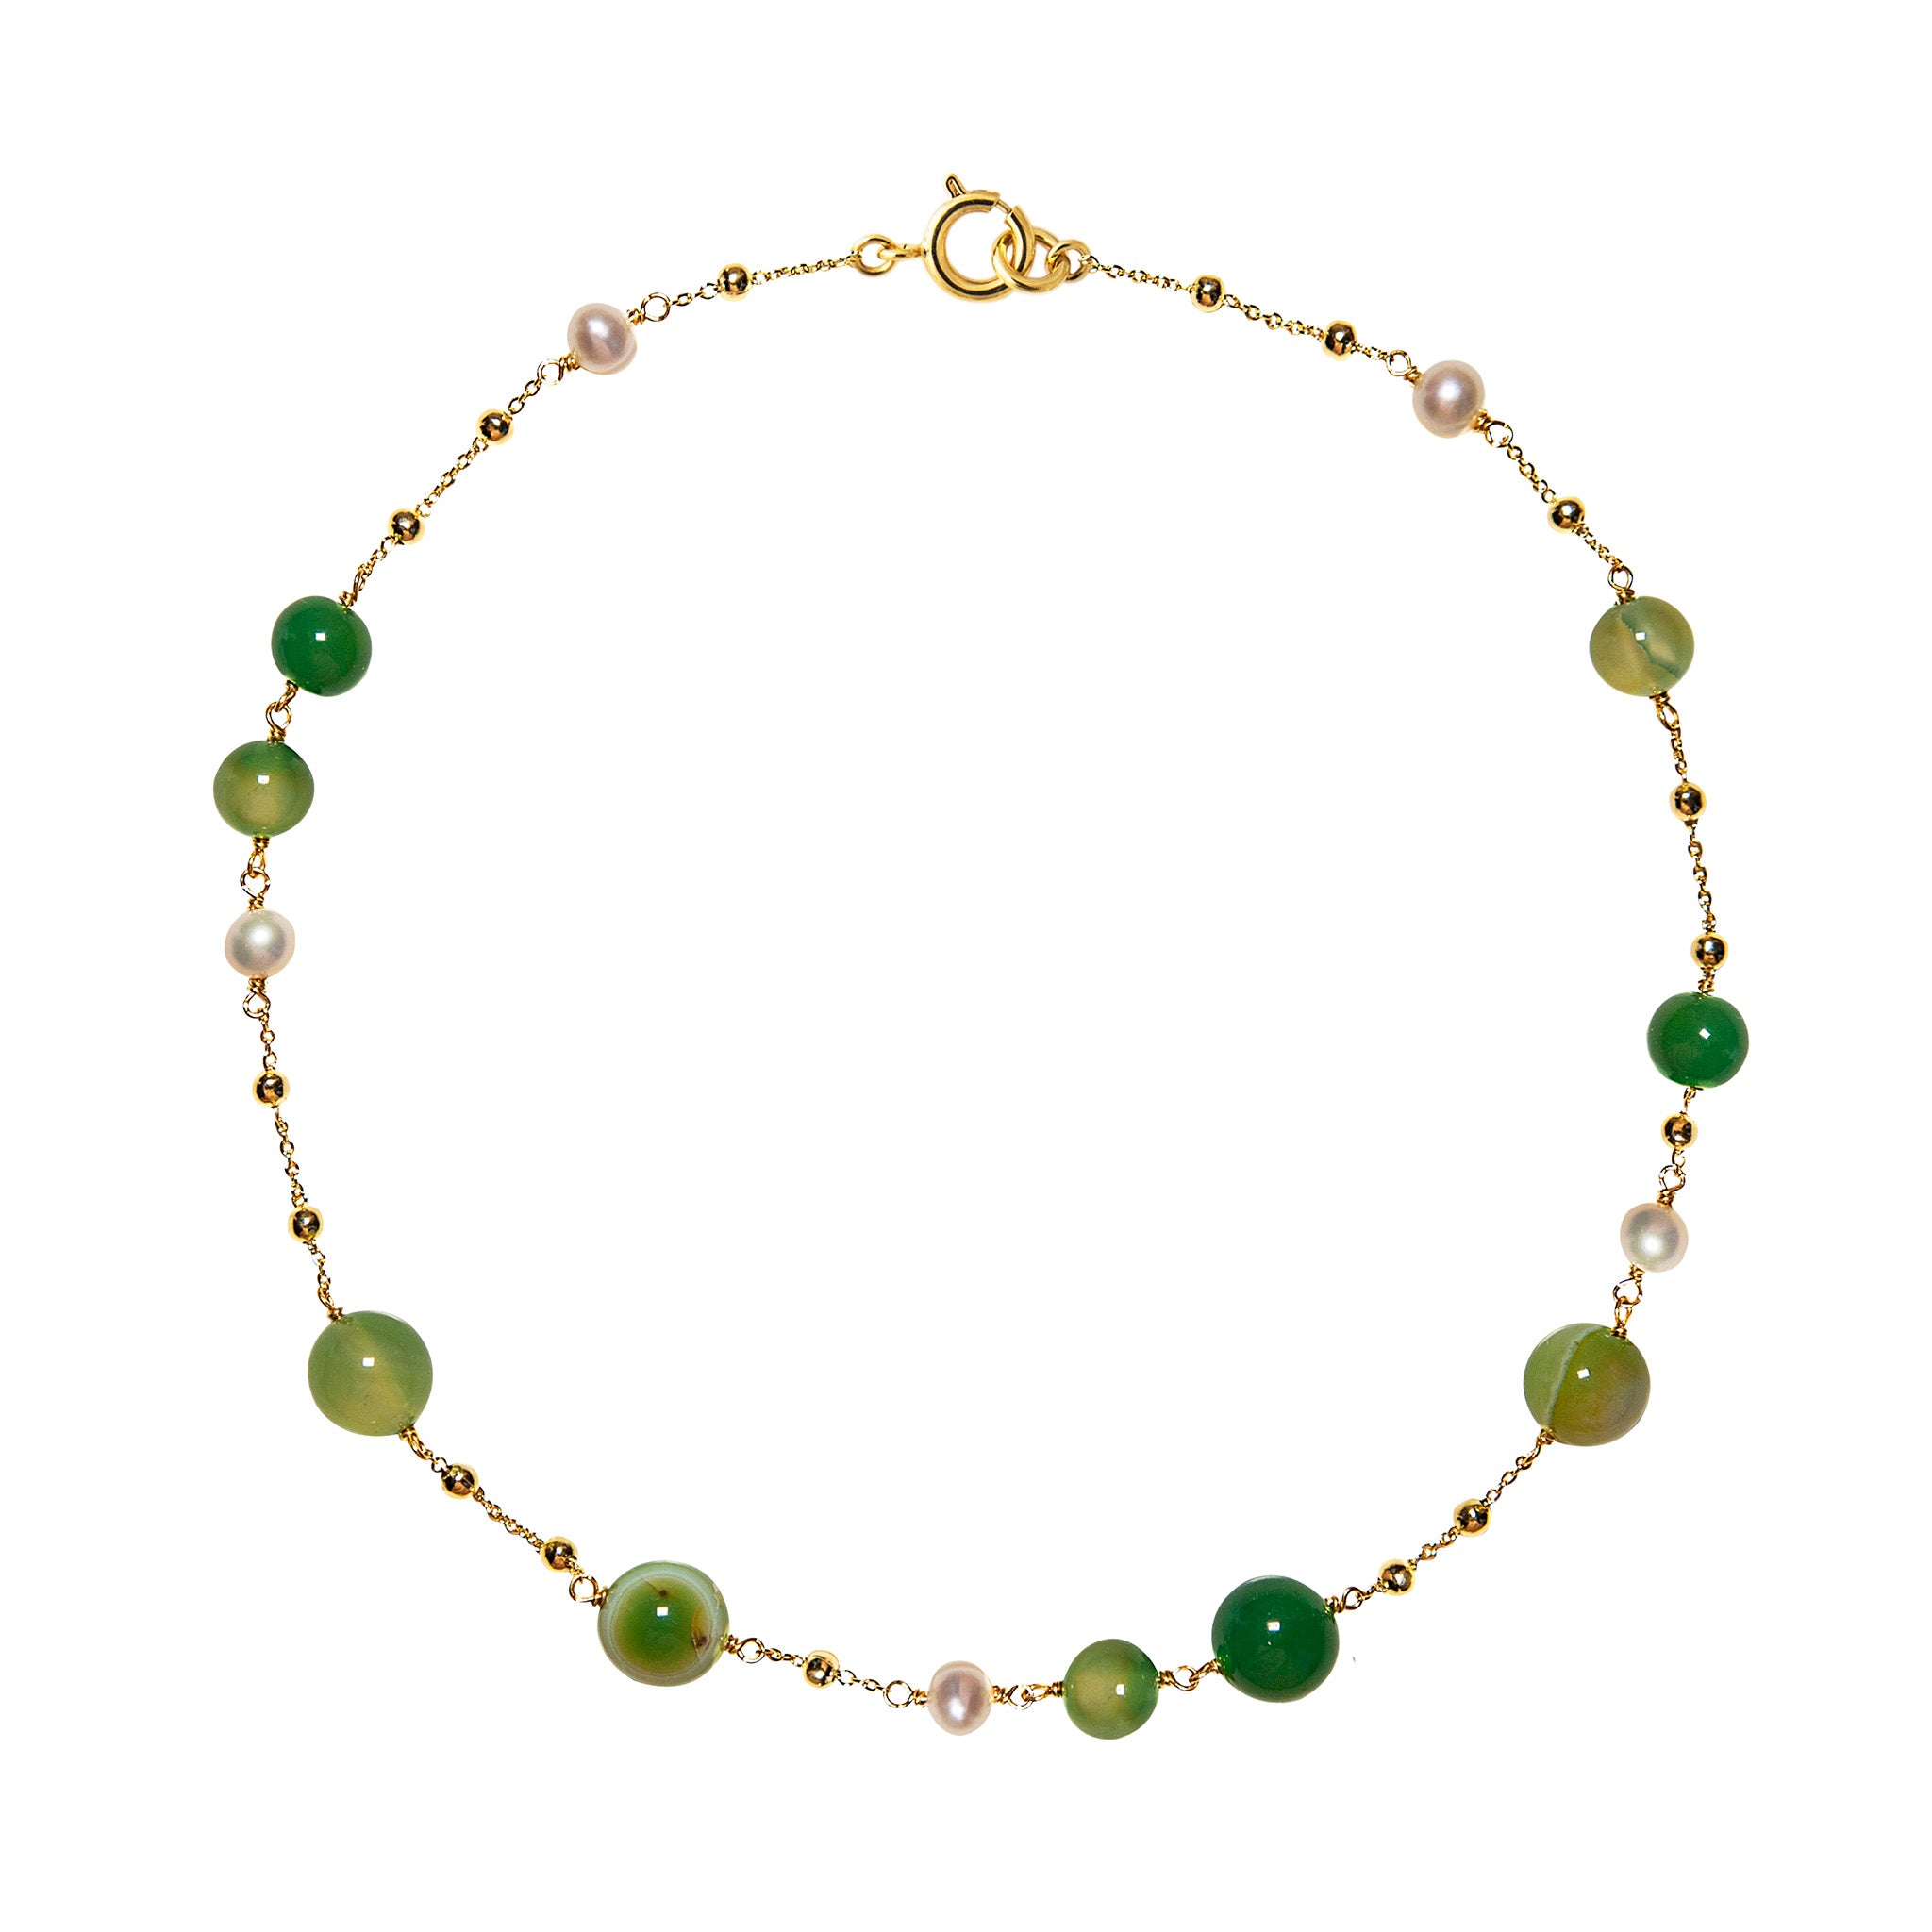 Necklace with green agate and cultured pearls